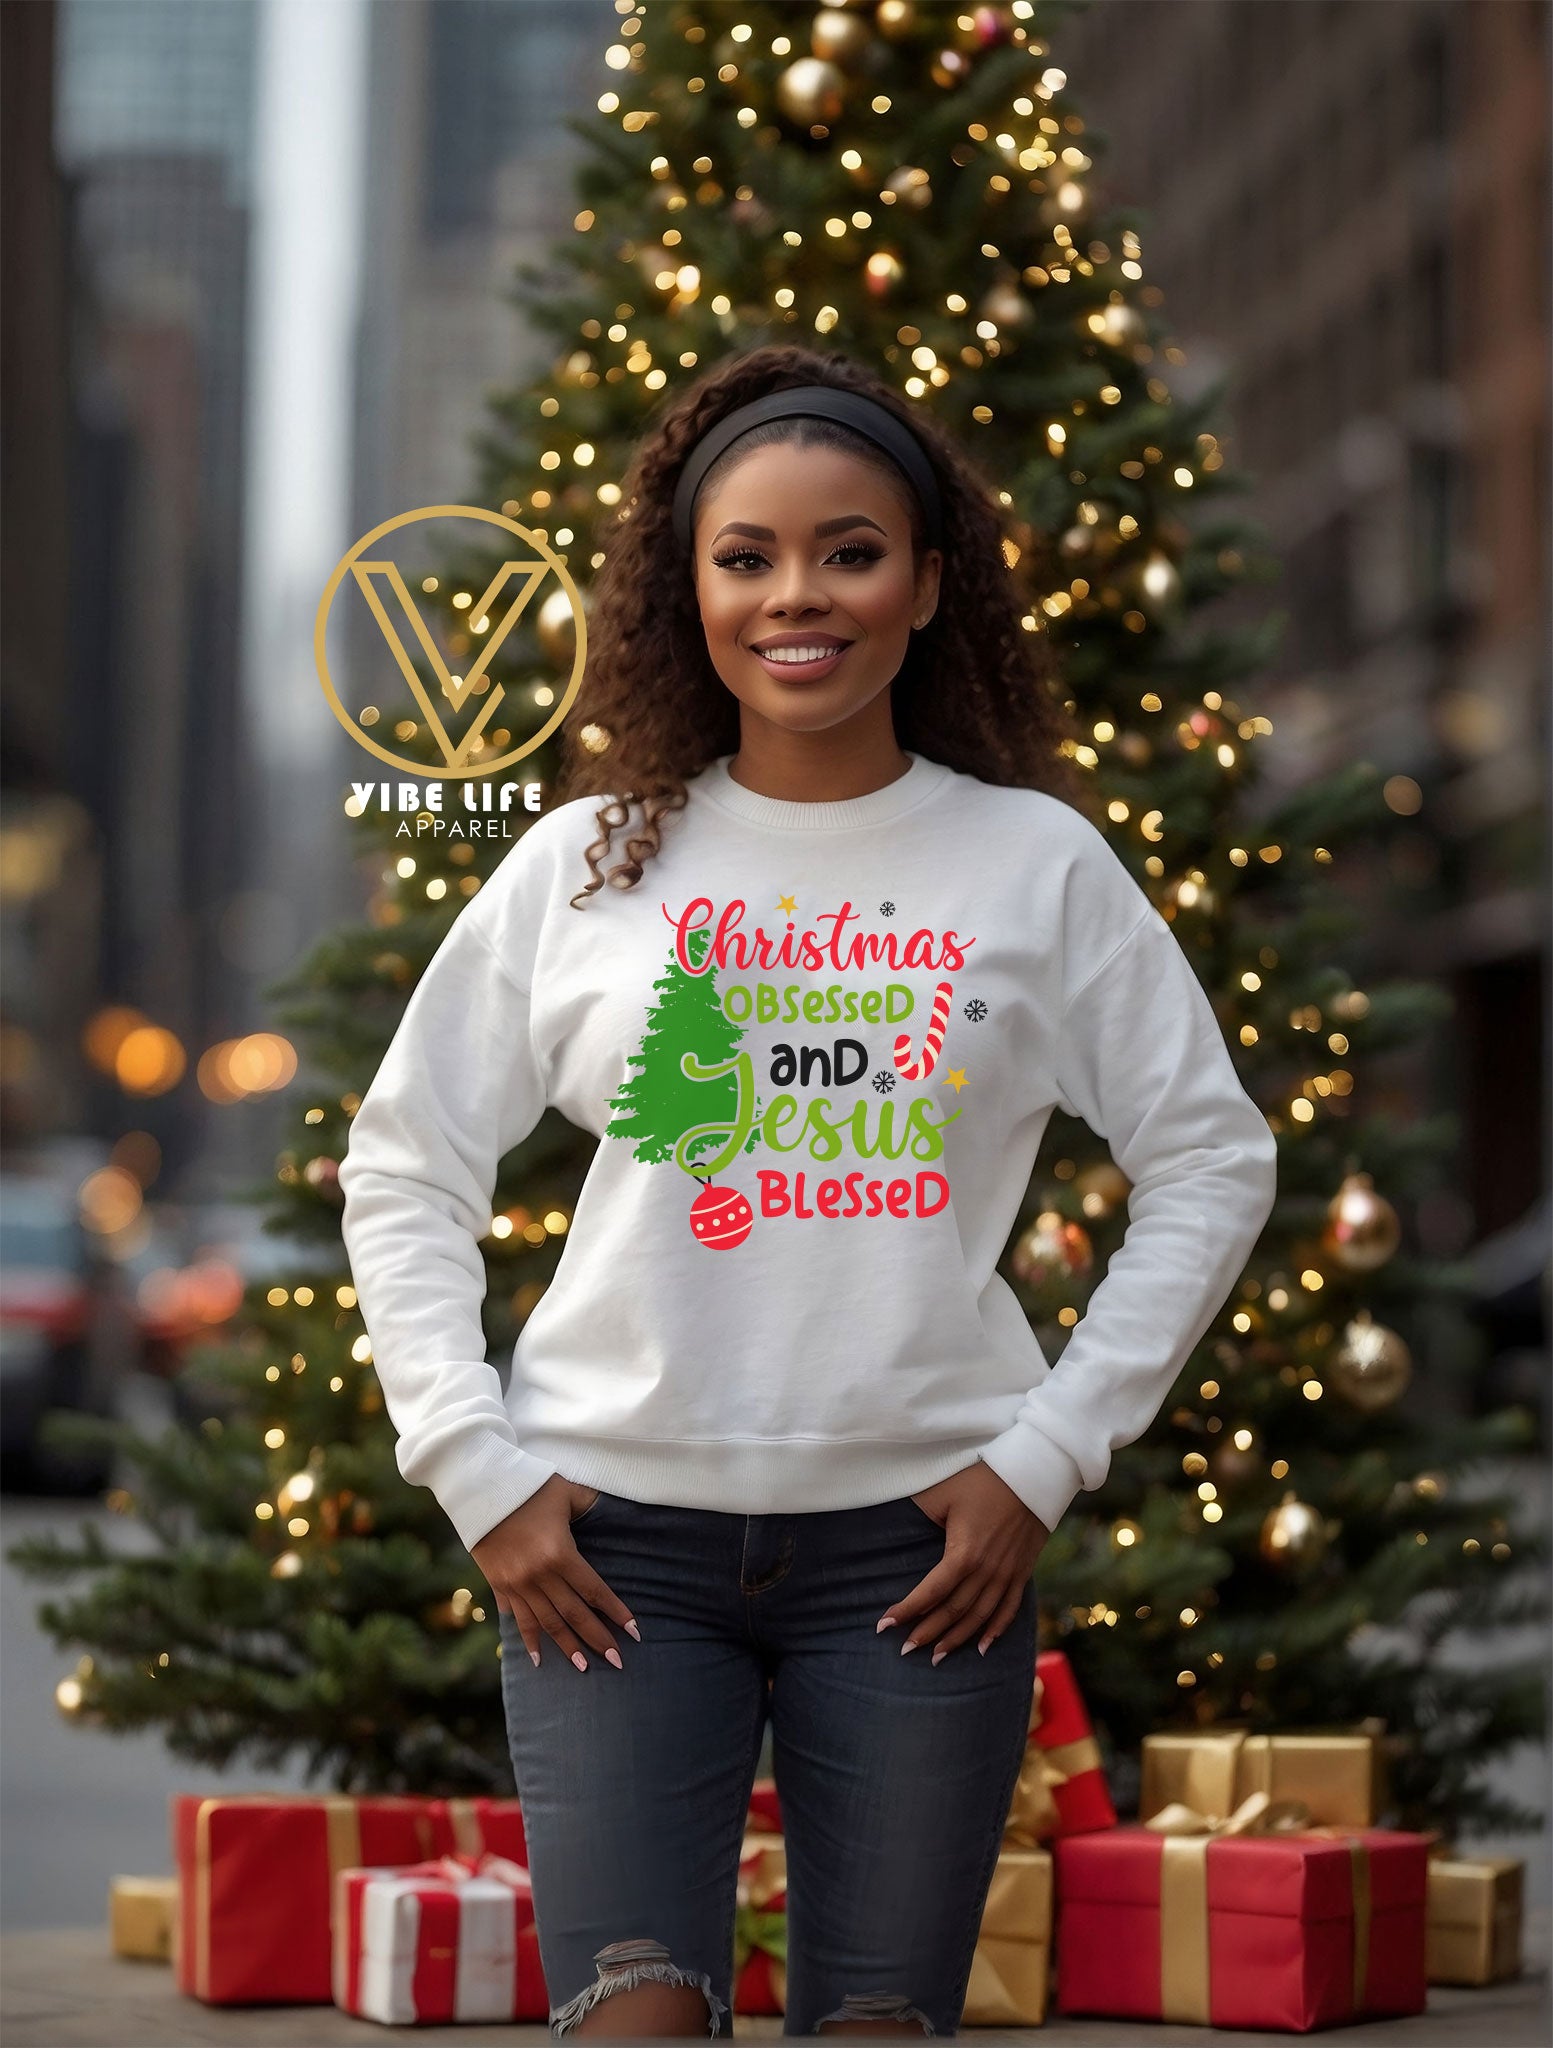  YSJZBS Womens Christmas Sweater,best black of friday